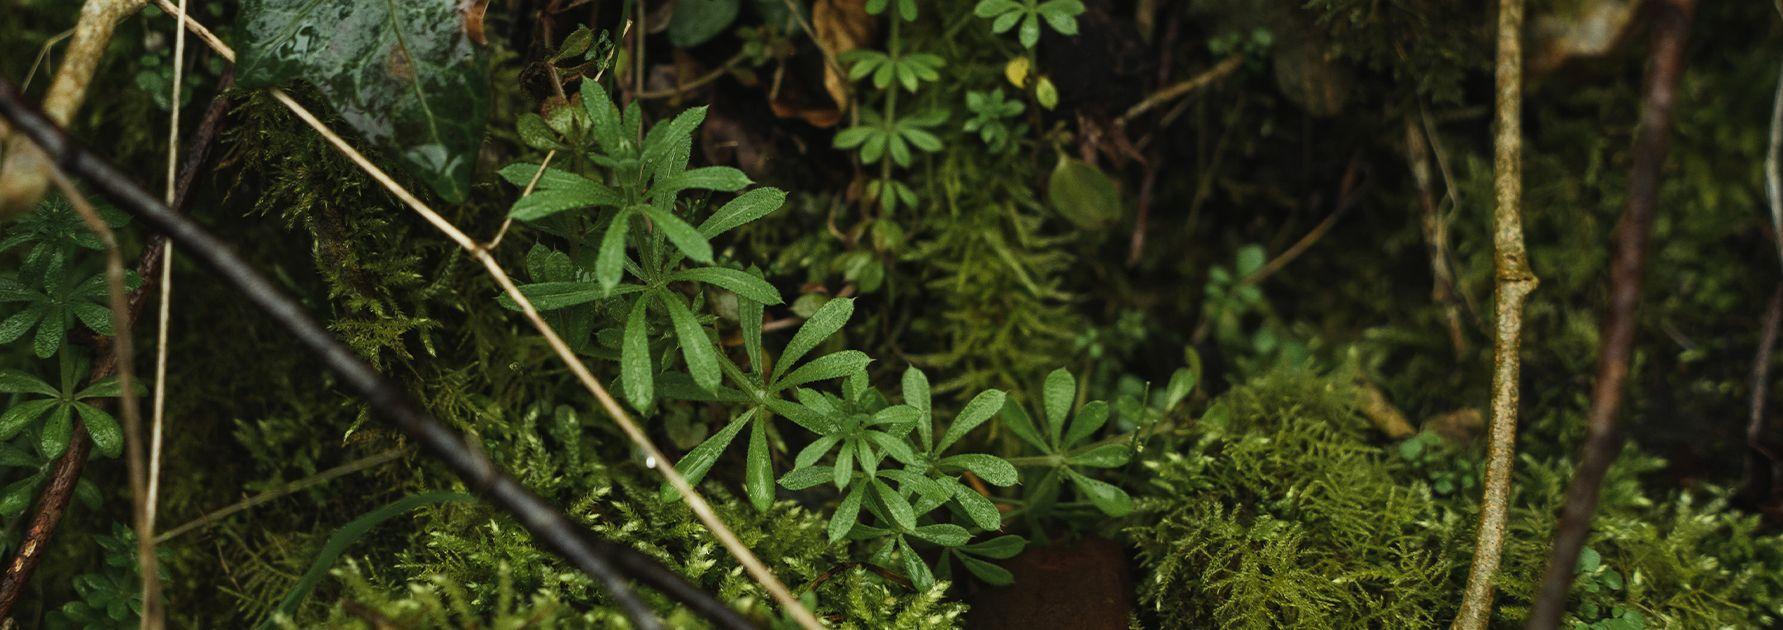 Cleavers growing on a woodland floor